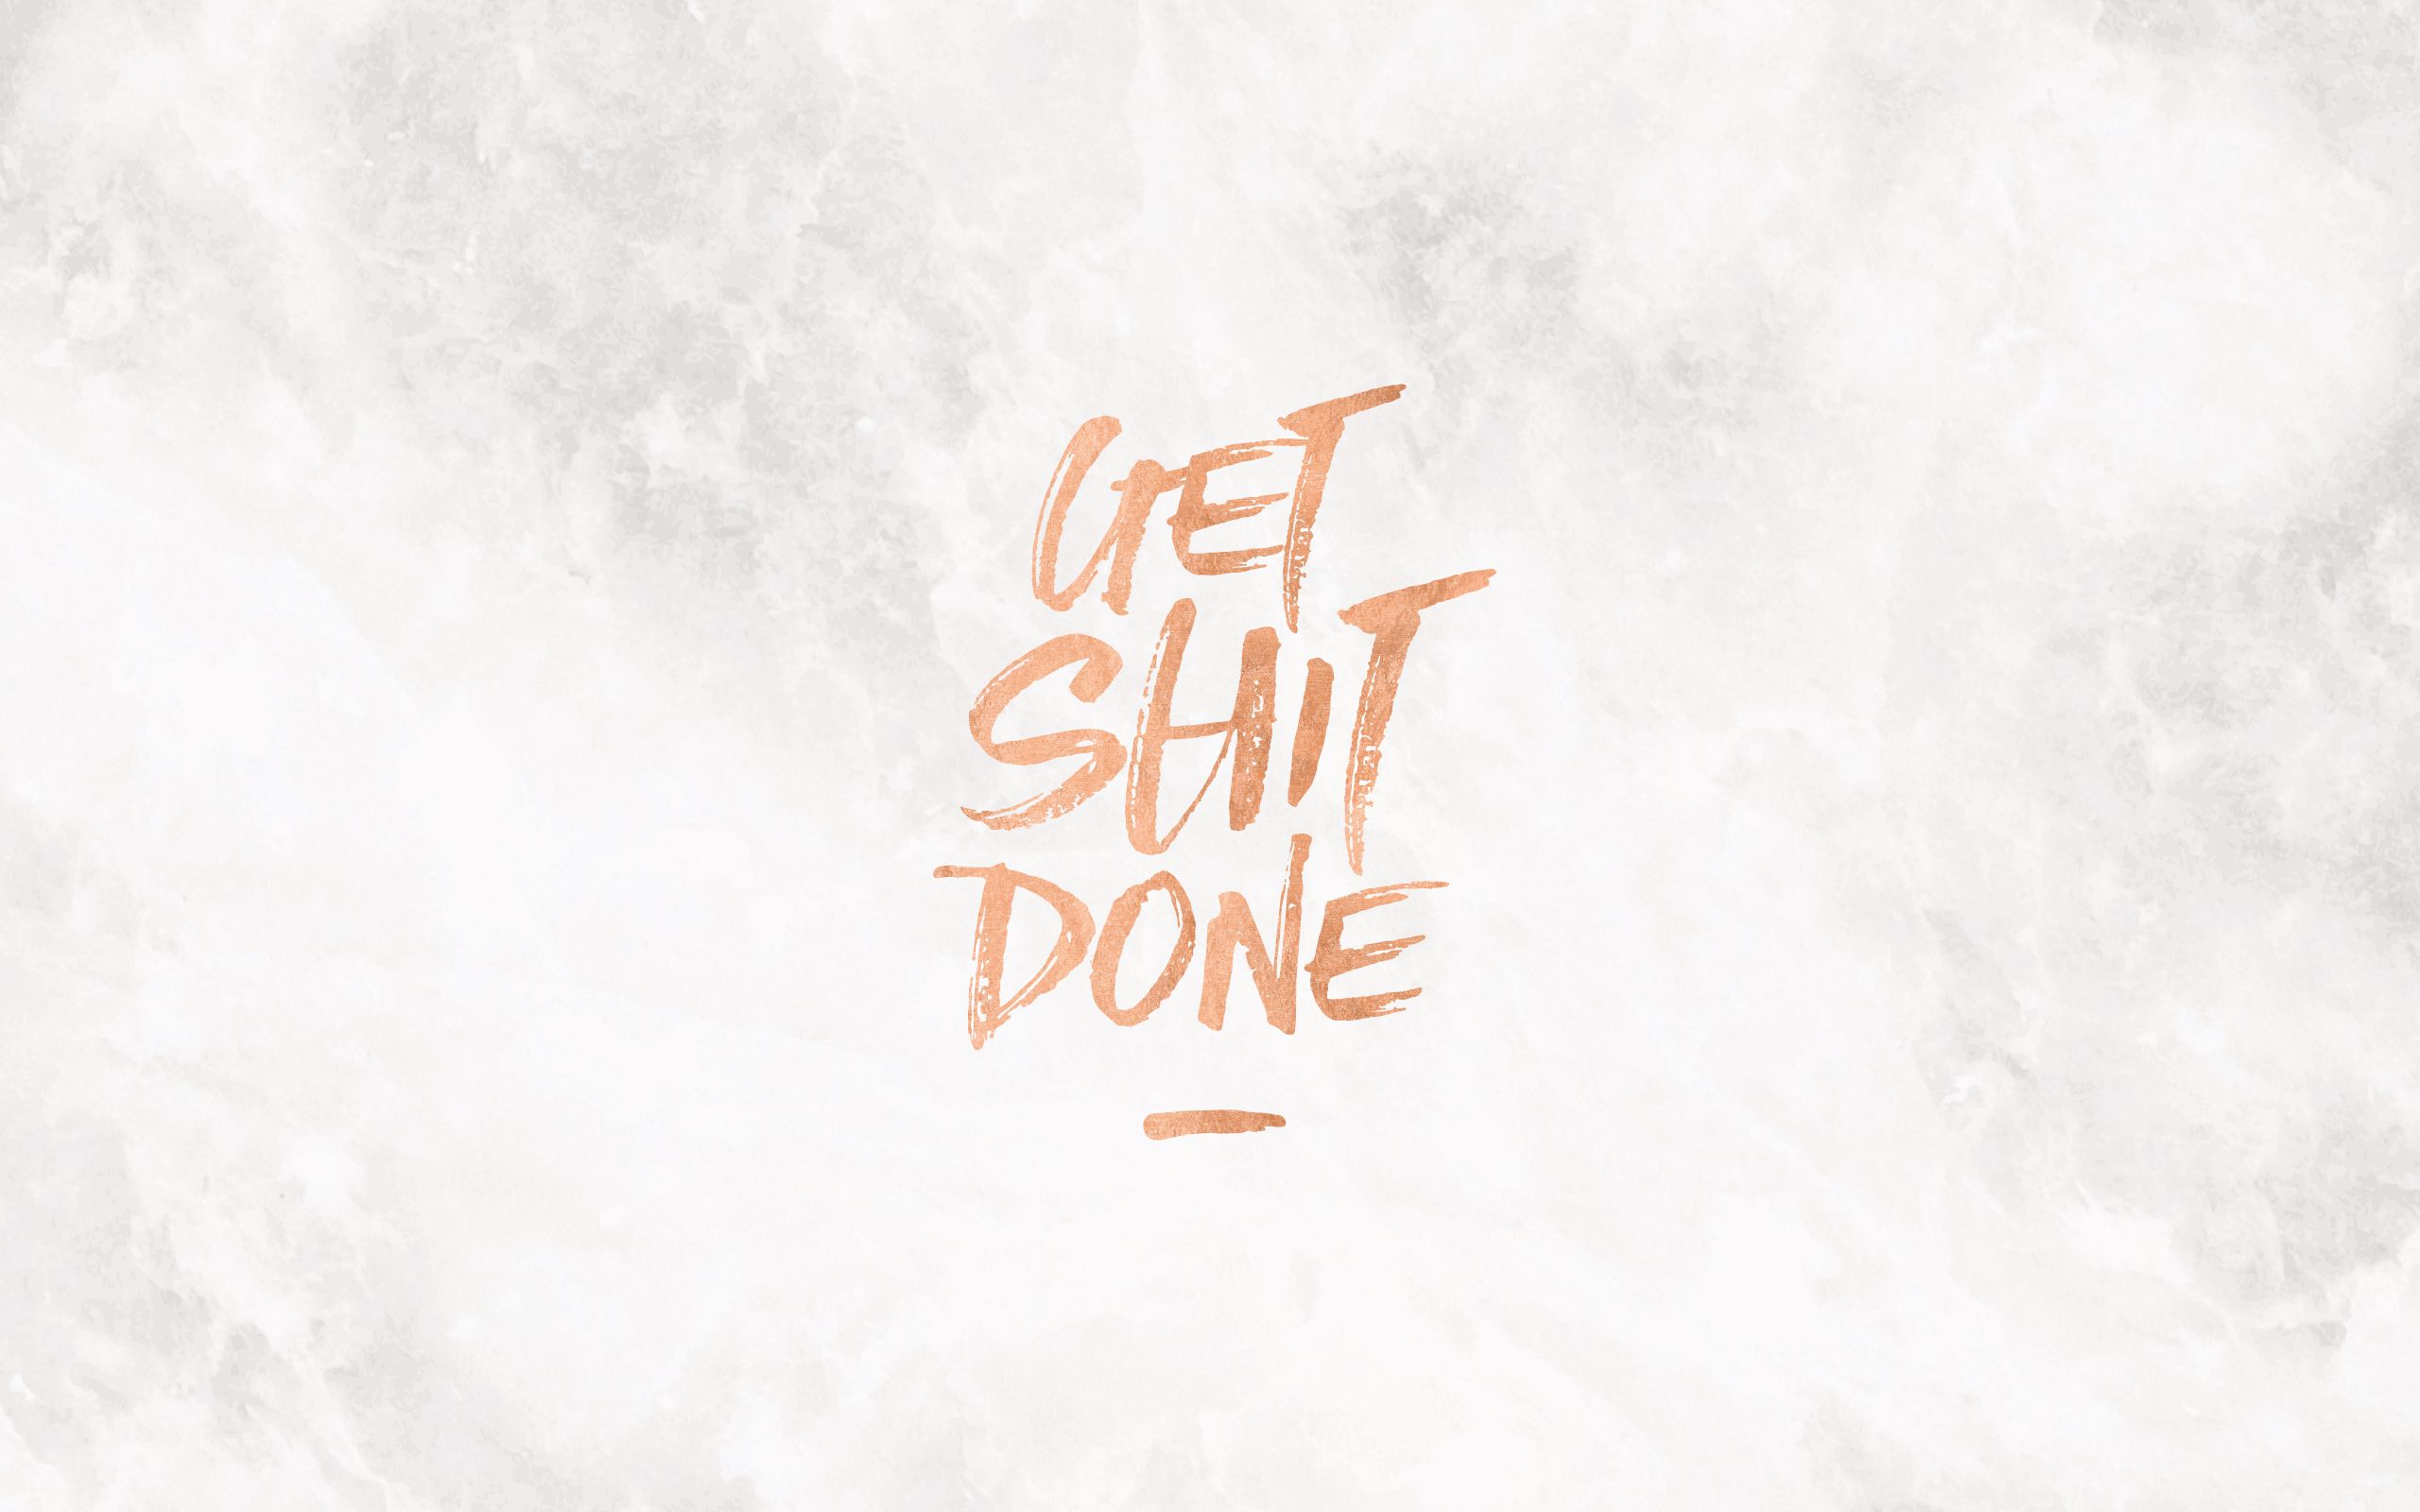 Get shit done, marble wallpaper